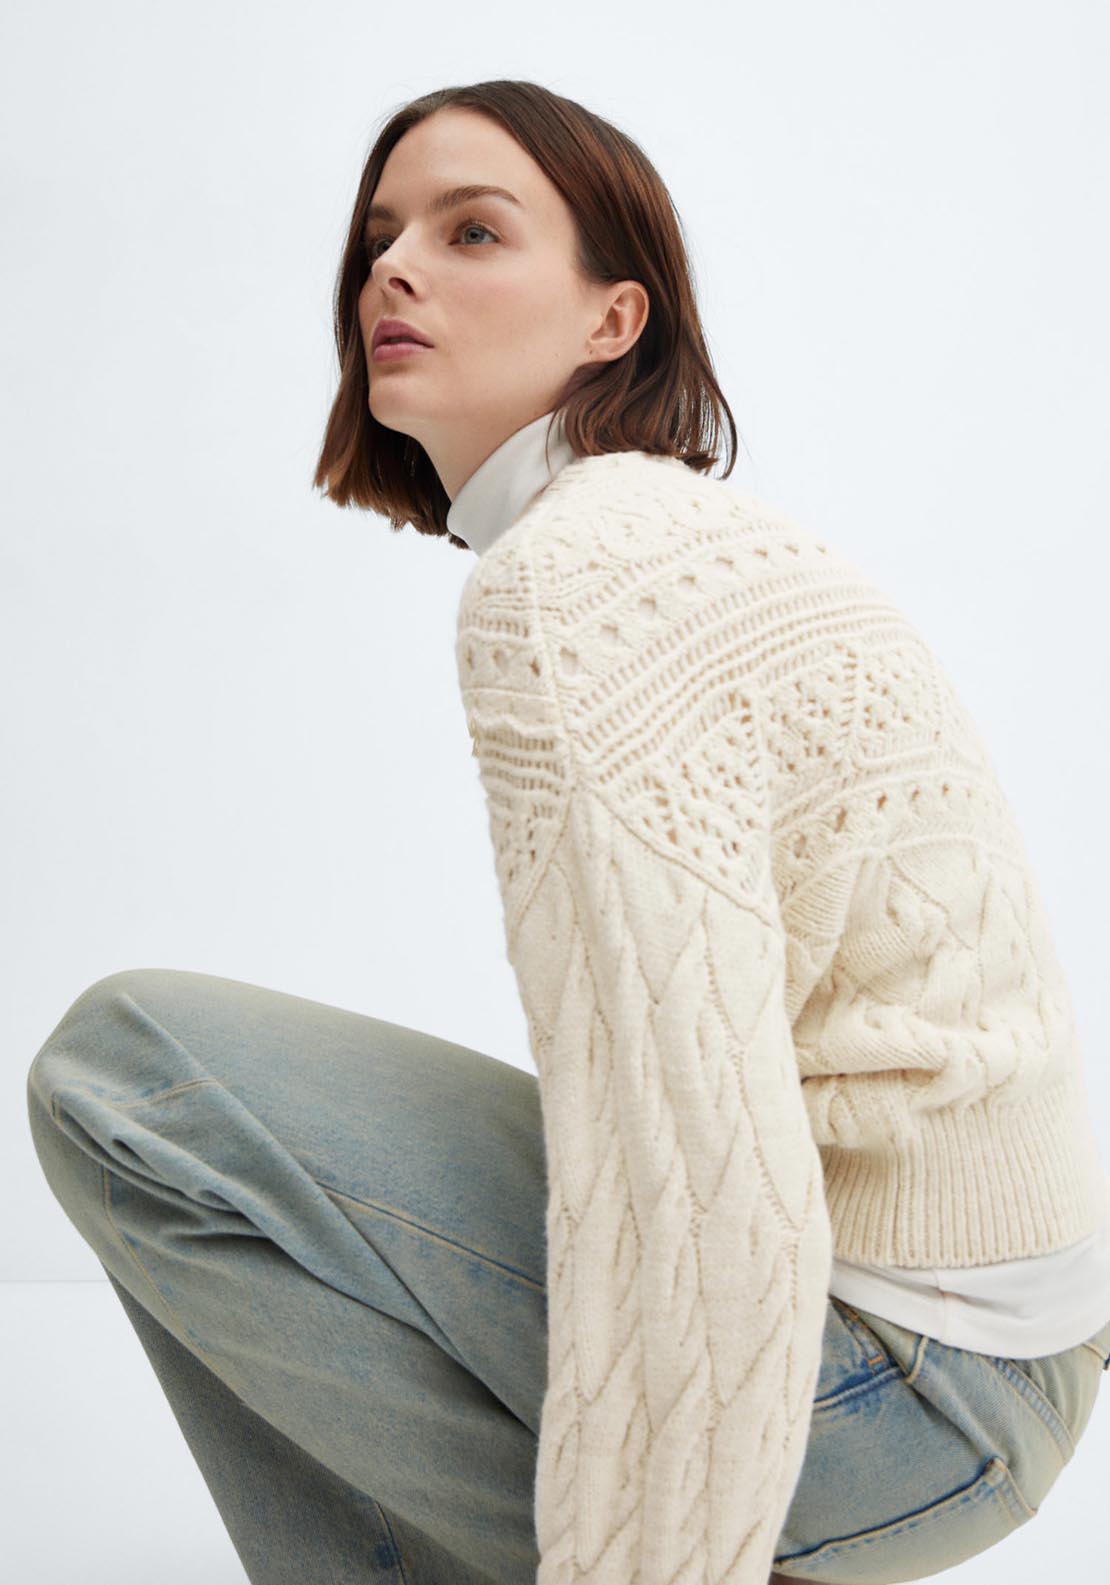 Mango Knitted sweater with openwork details 2 Shaws Department Stores